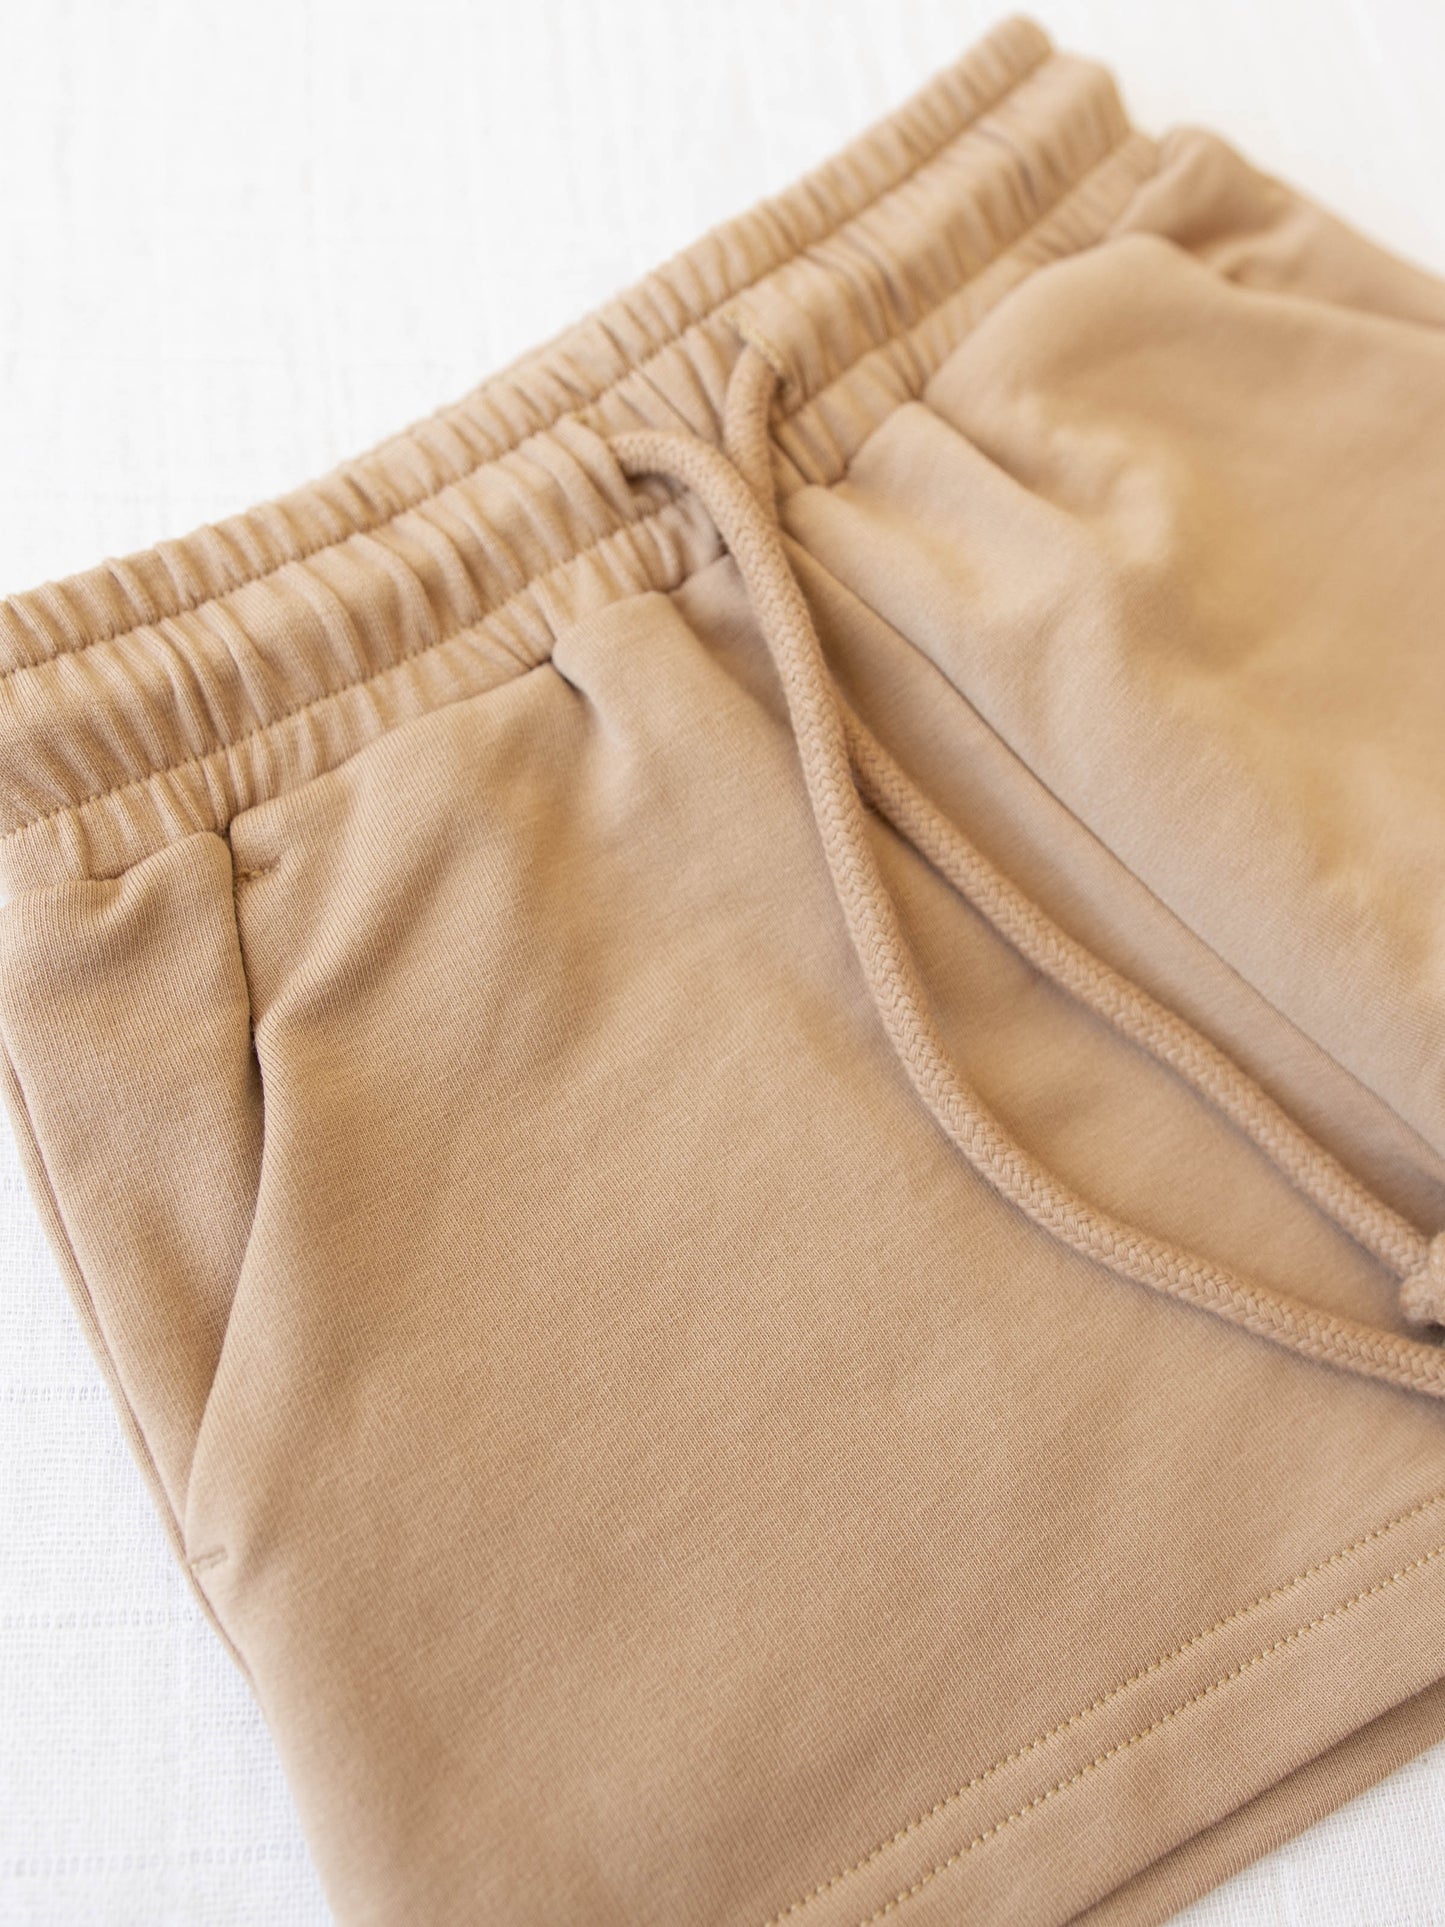 Closeup of the shorts with an elastic waistband, pockets, and functional drawstring.